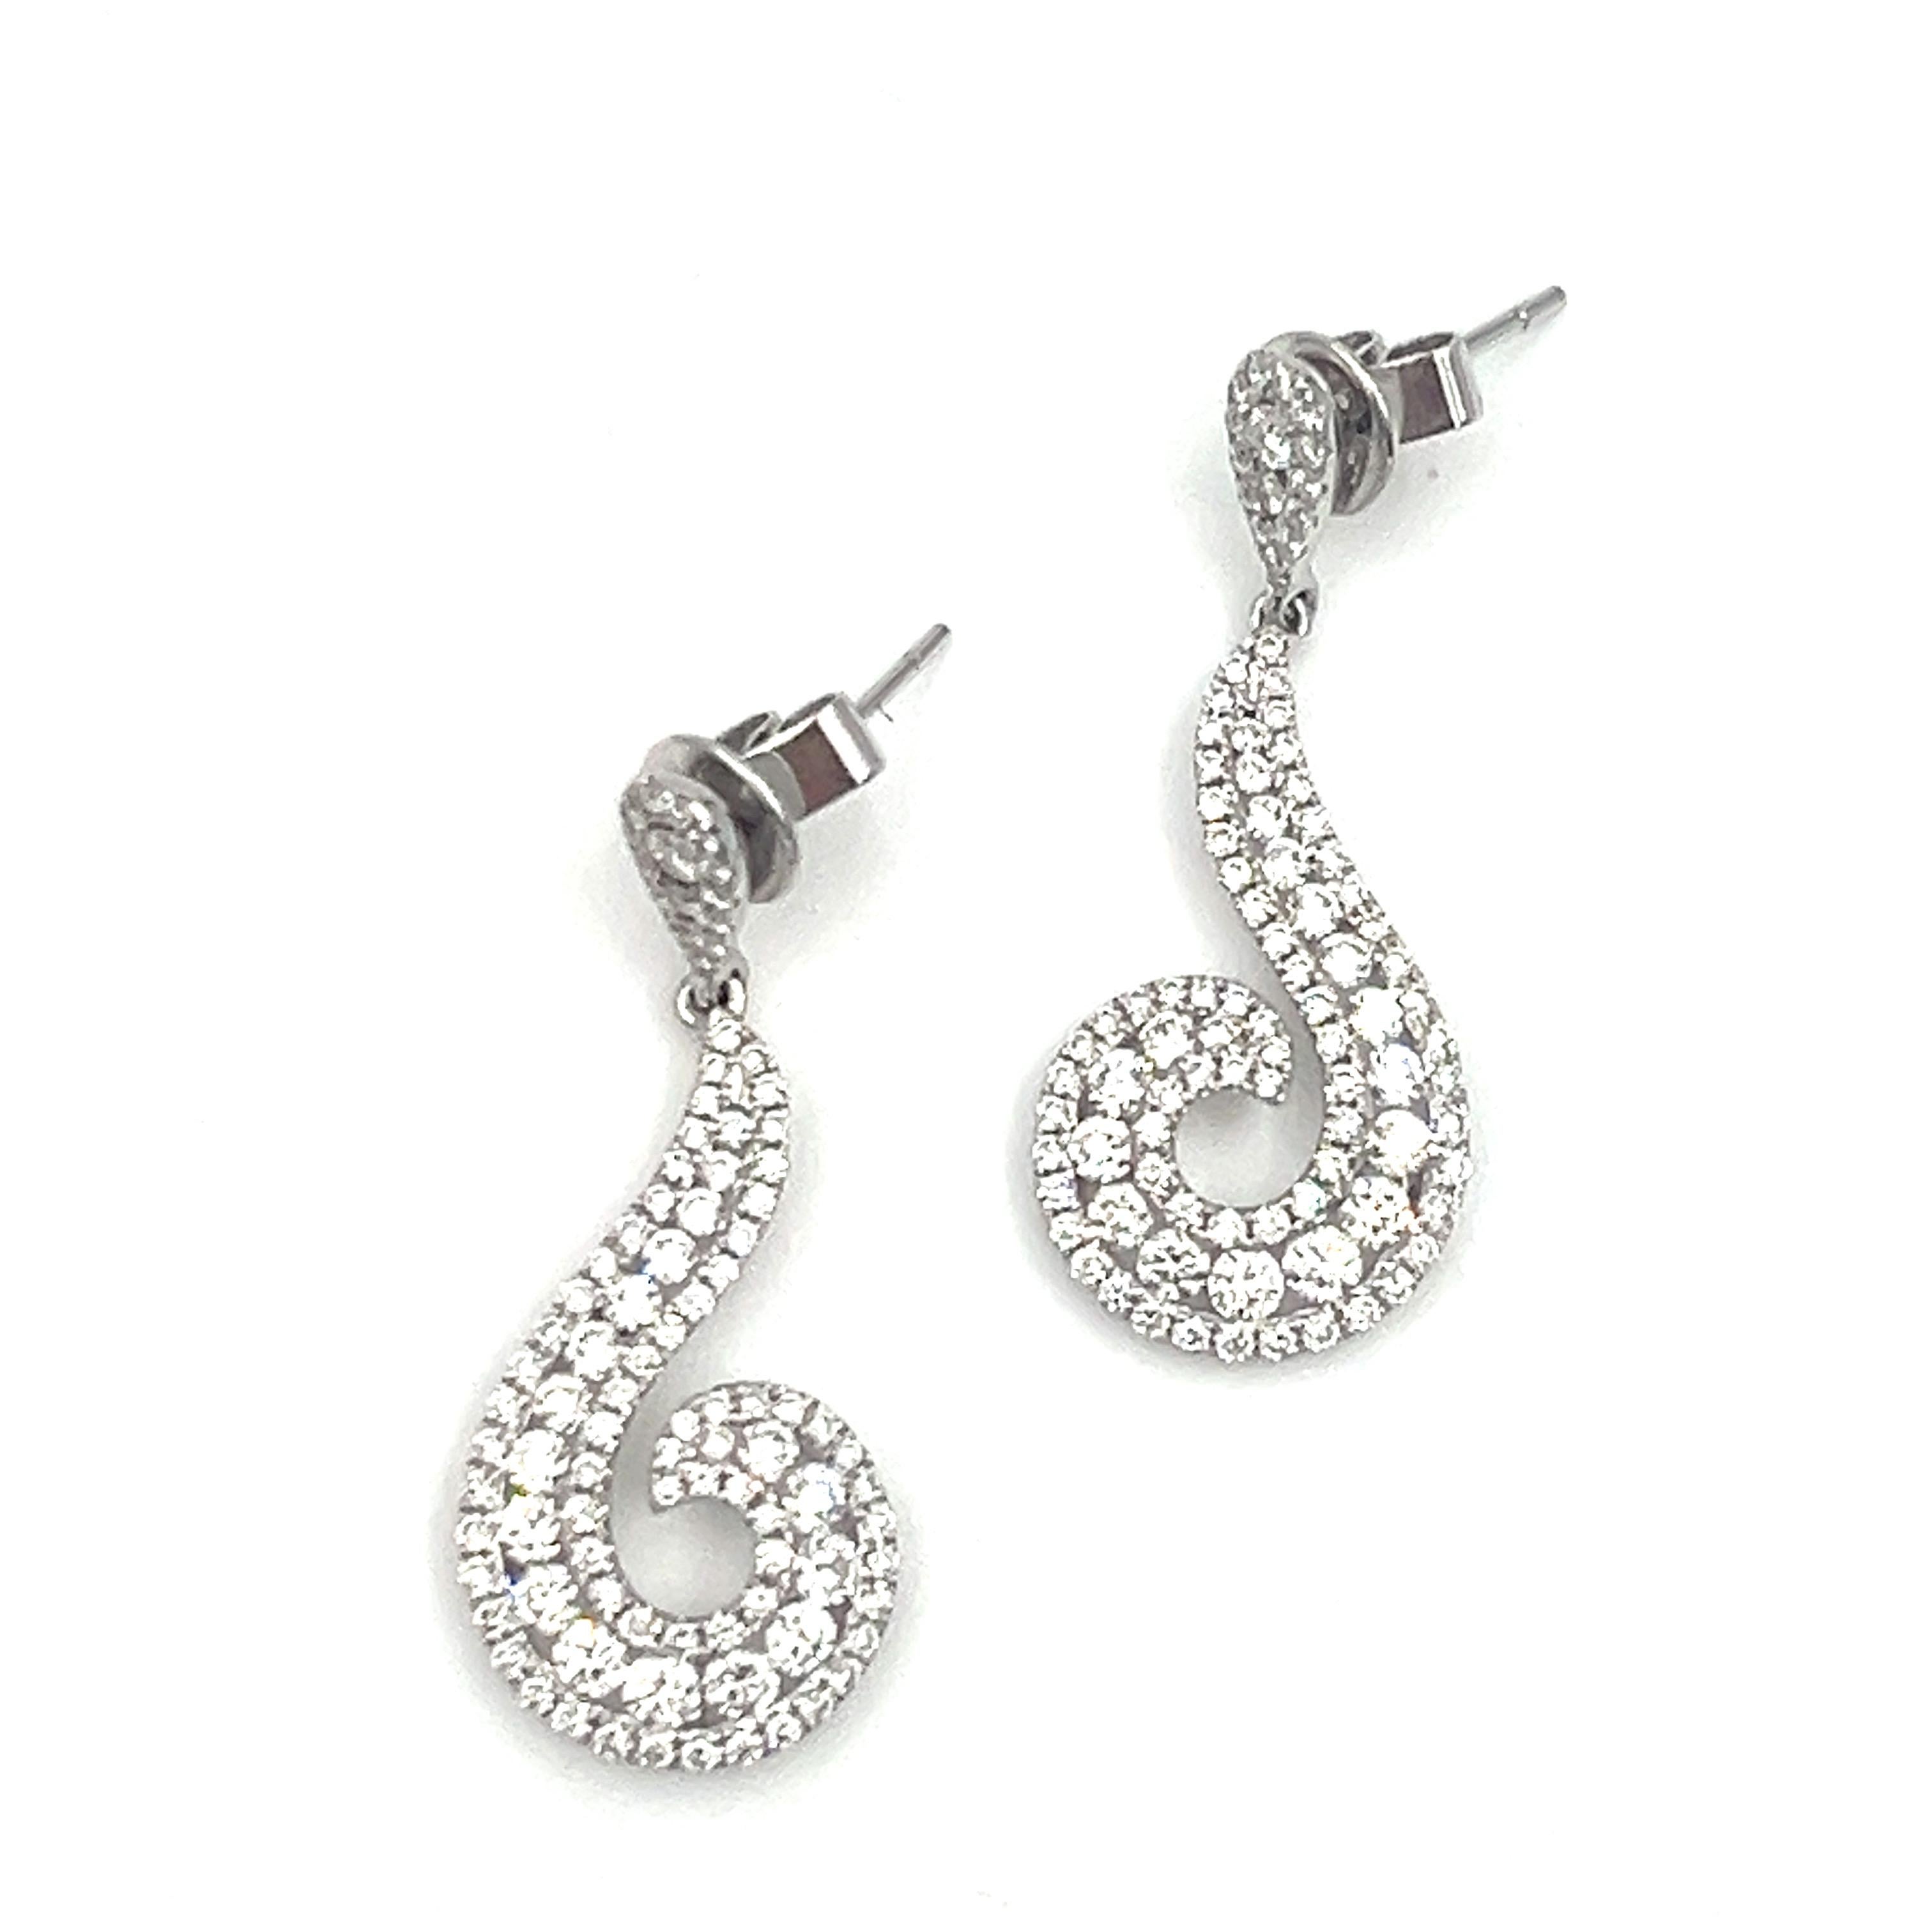 These stunning 2.84 ct diamond dangle earrings will be a showstopper to your wardrobe. Featuring 194 diamonds with an F/G in color and a VS1/VS2 in clarity, they are a must have for any fashionista. 